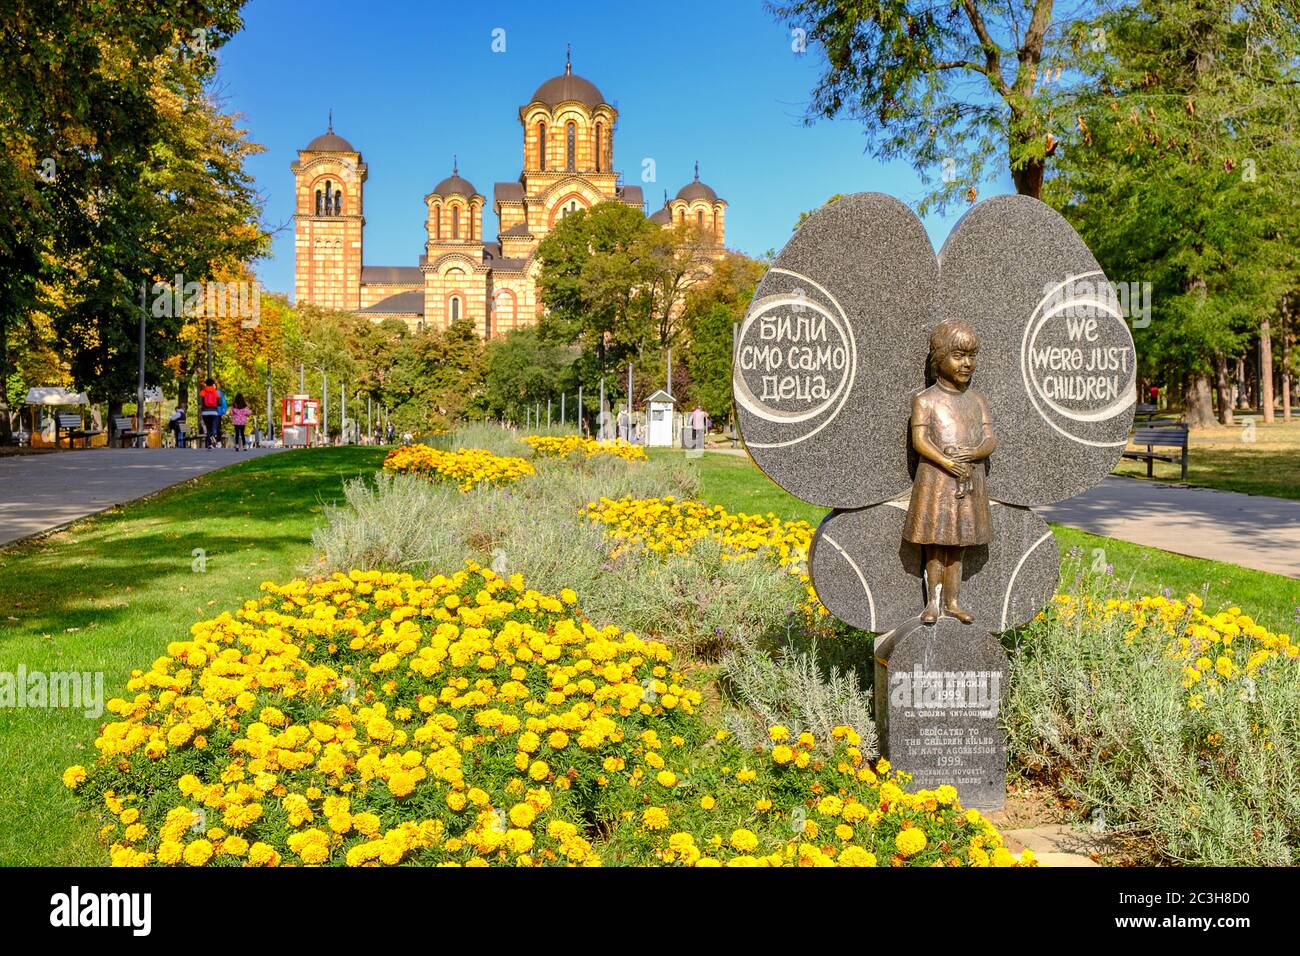 Belgrade / Serbia - September 30, 2018: Monument to children killed in the NATO bombing campaign of 1999 and St. Mark's Church in the background in Ta Stock Photo